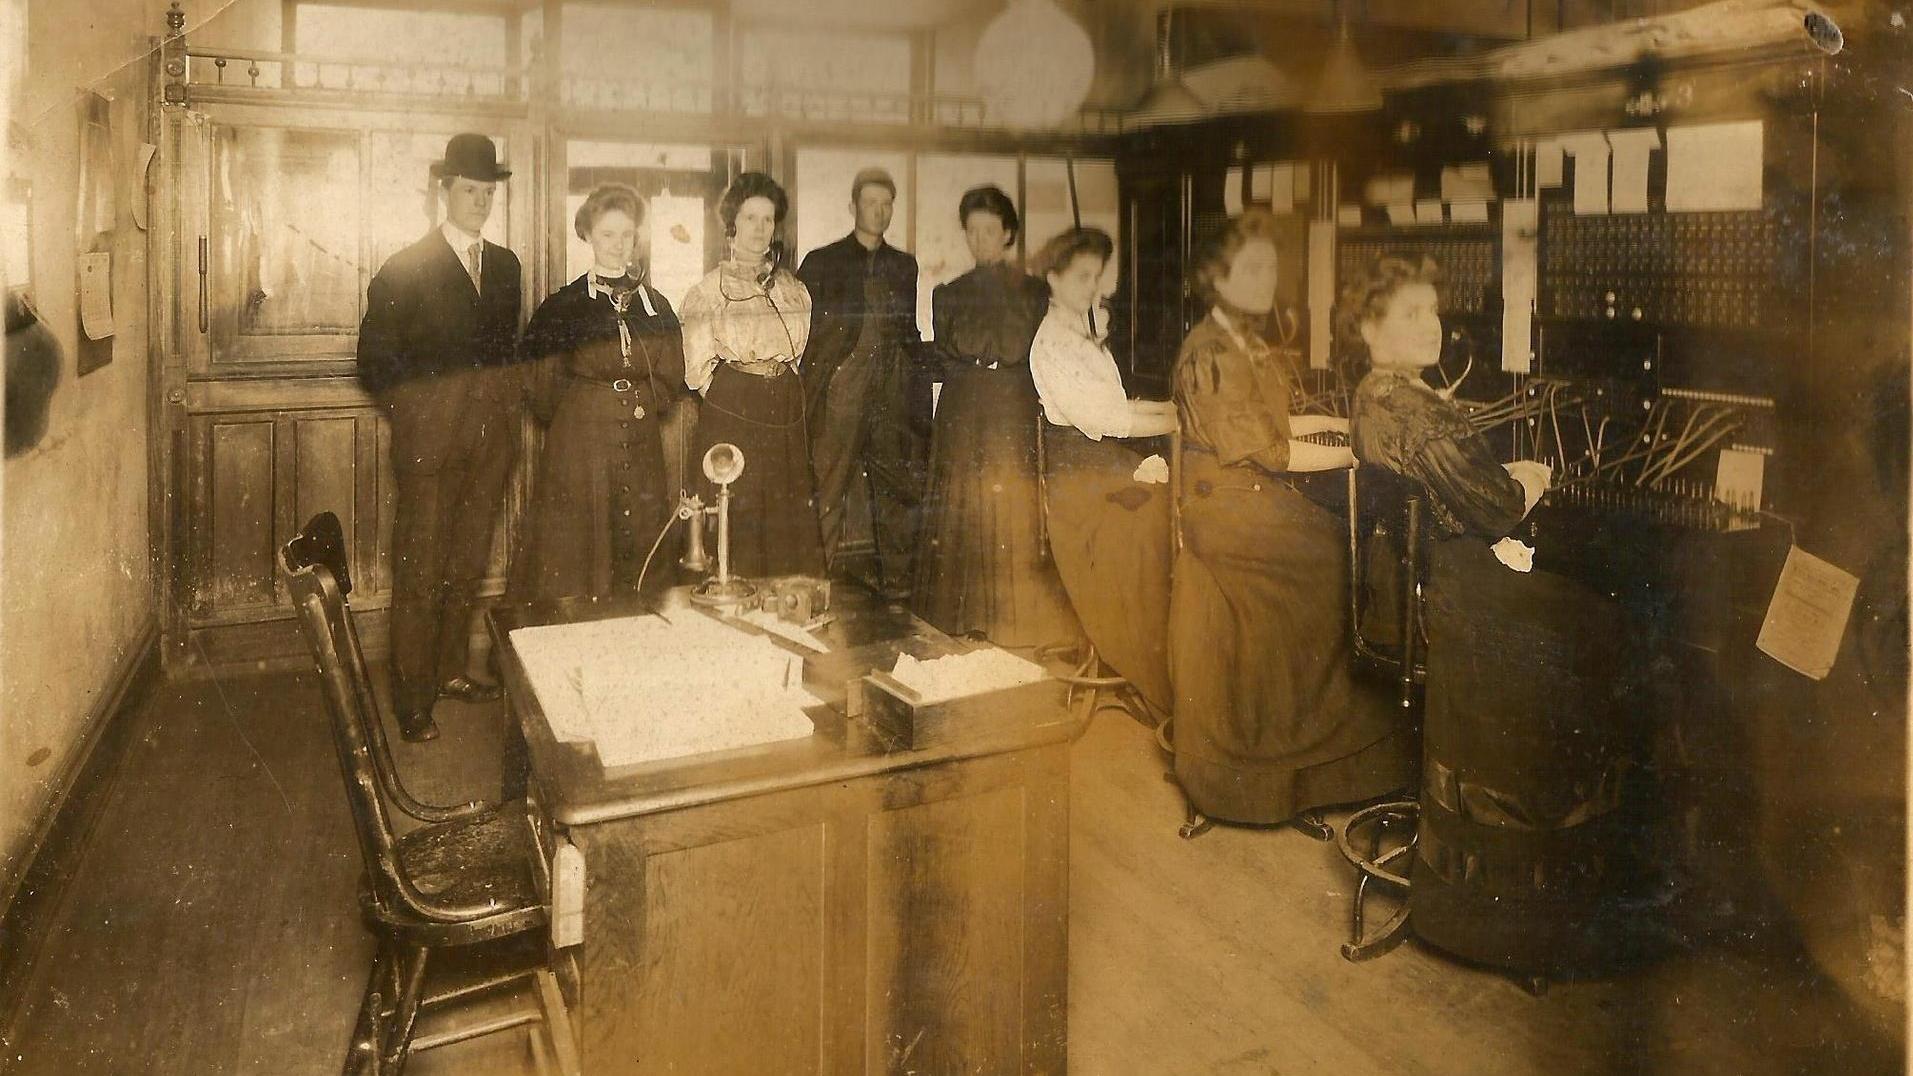 Decorative - Image of the Past series photo of three women at a switch board. Two additional men and three women are standing at the back of the room. 